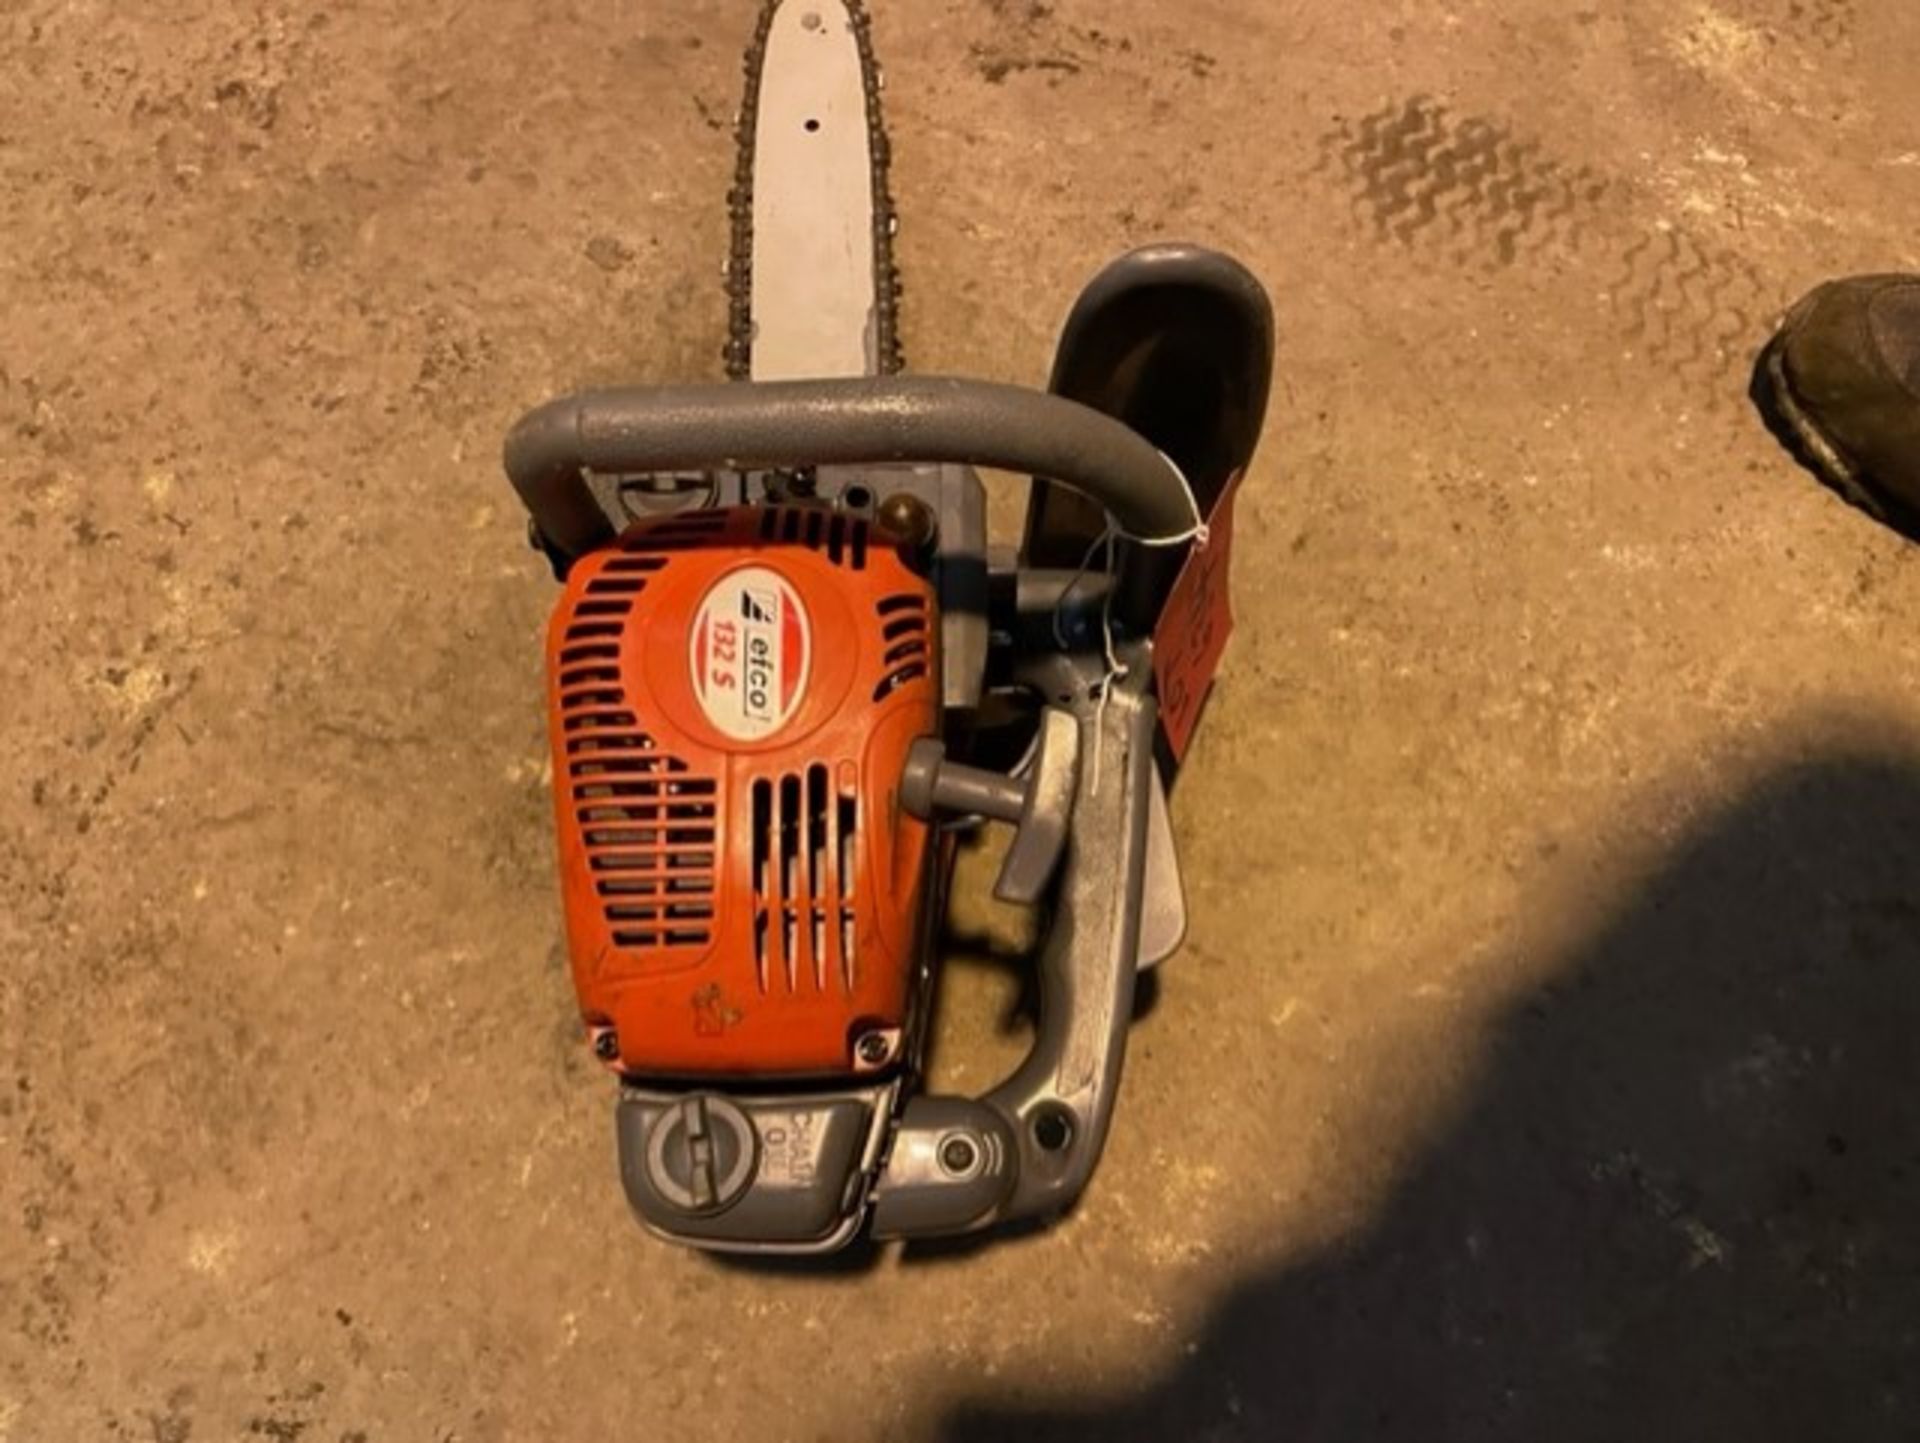 Efco pruning saw tidy little machine - Image 3 of 3